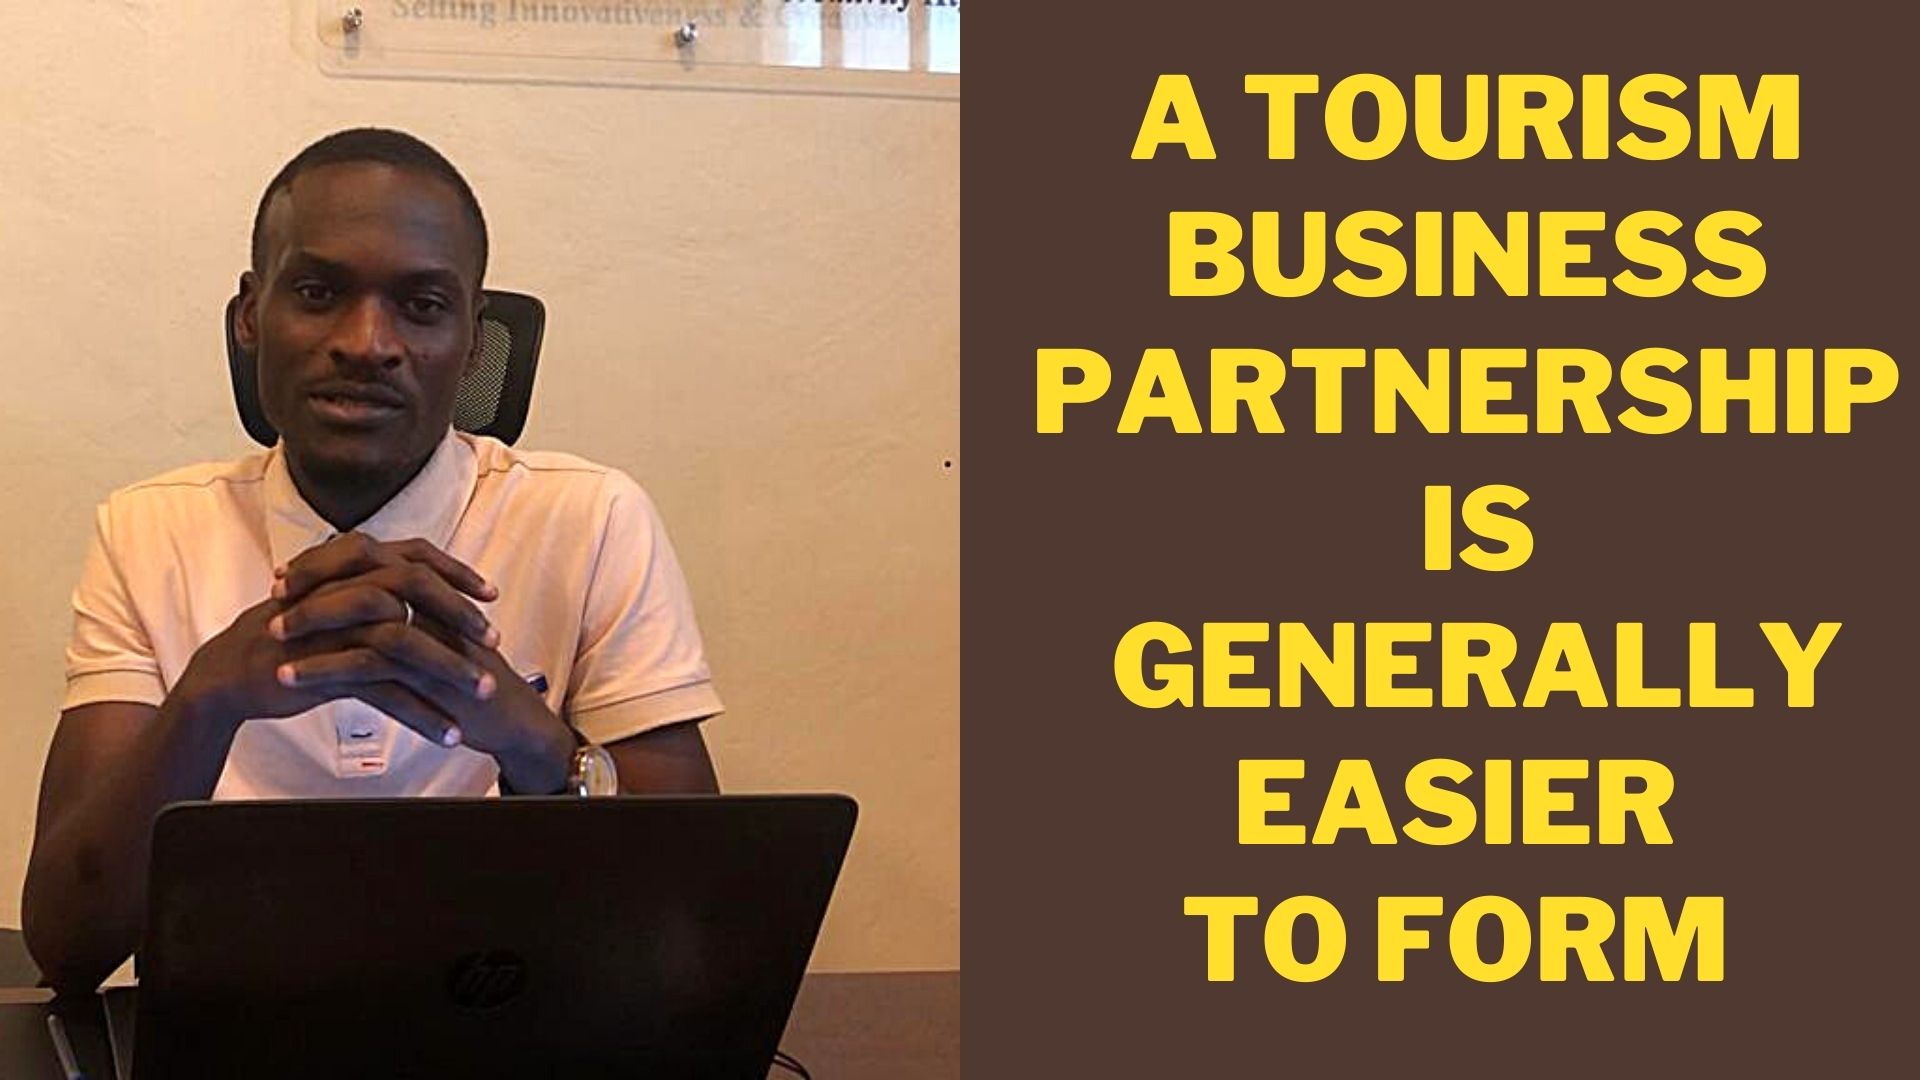 Finding A Partner To Start Tourism Business